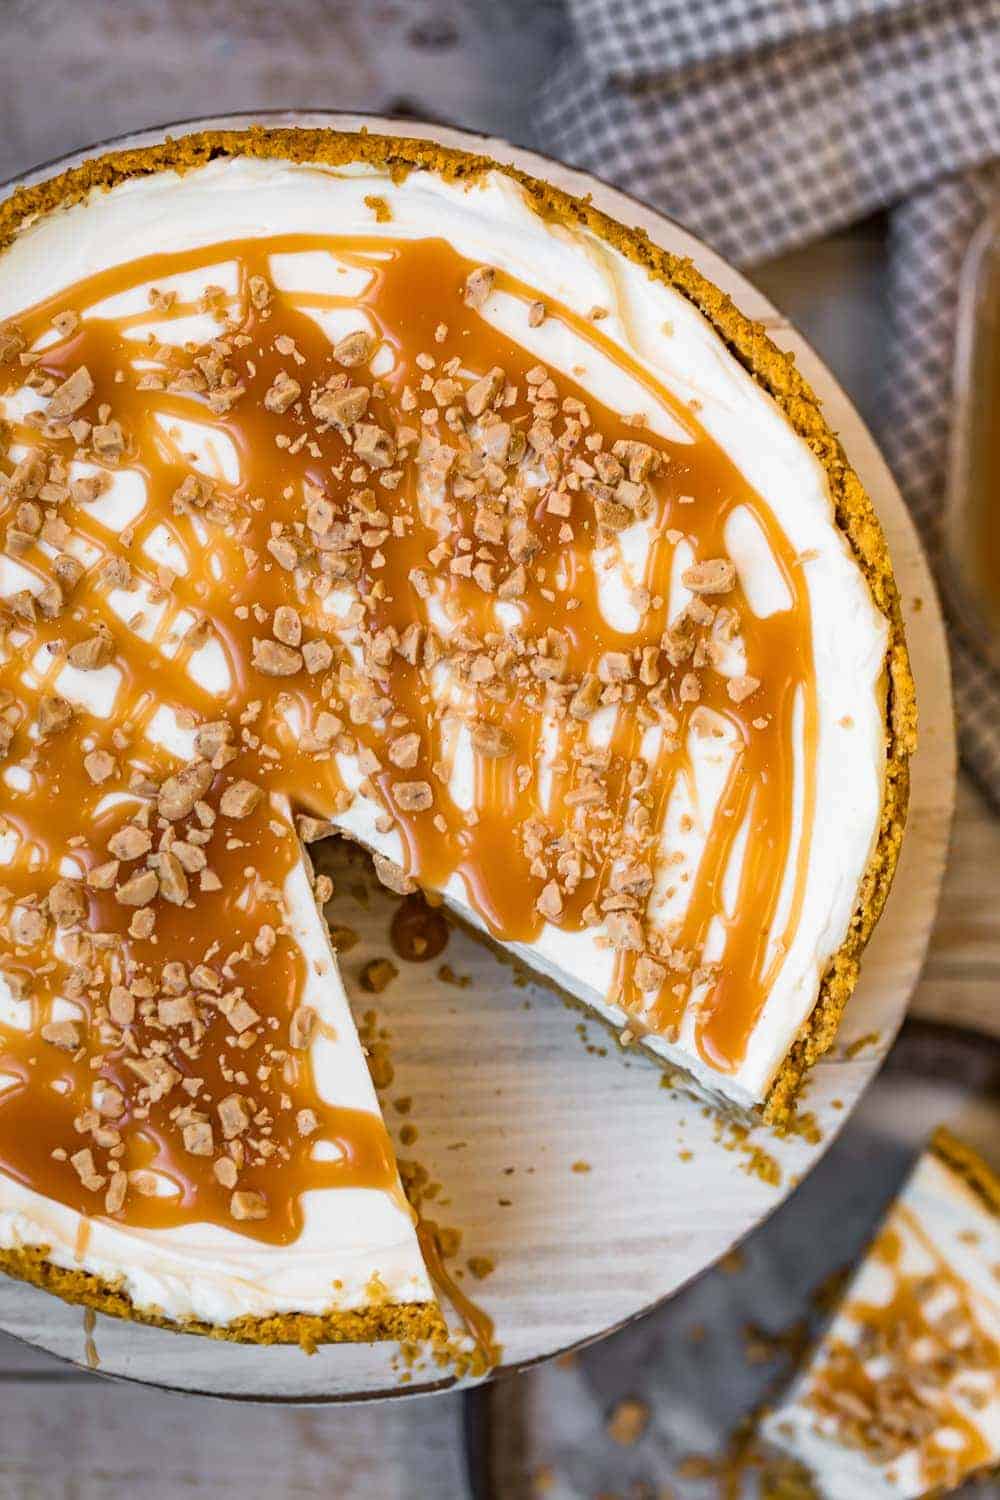 A cheesecake drizzled in caramel sauce